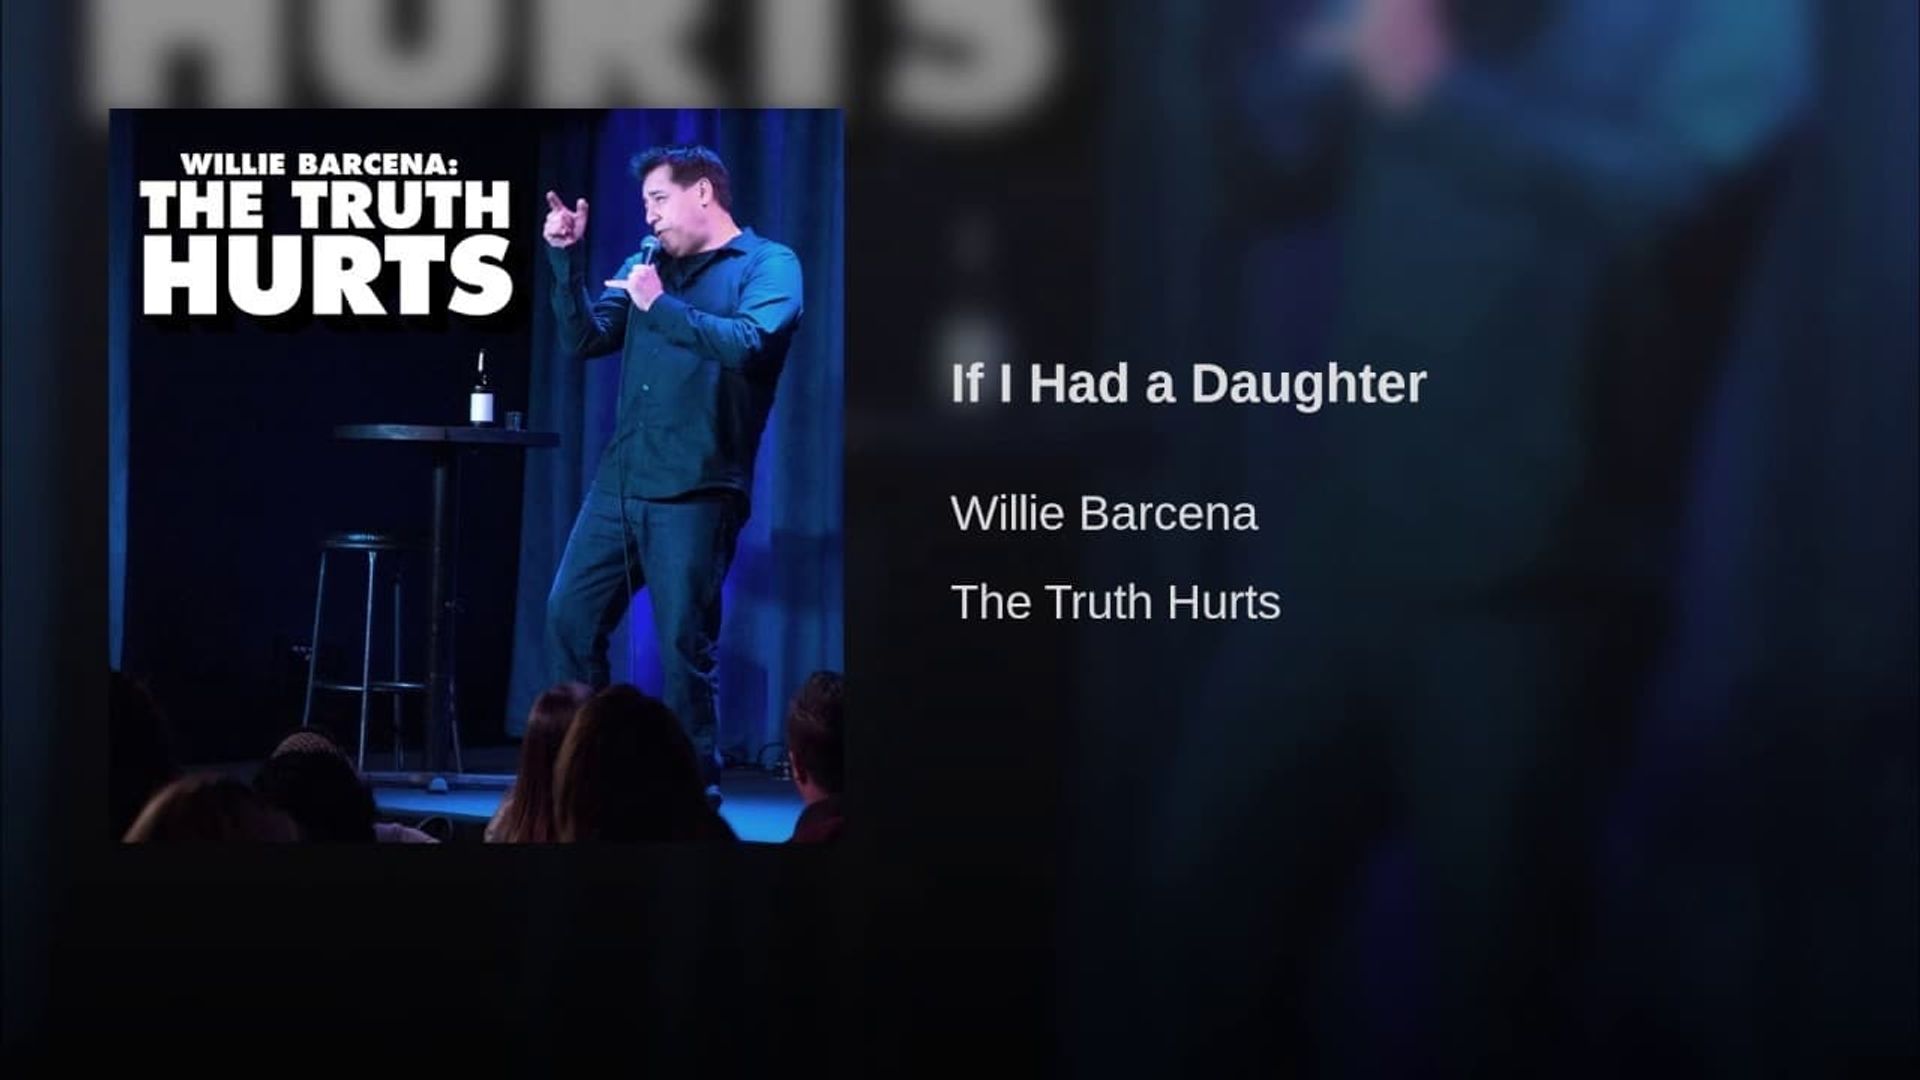 Willie Barcena: The Truth Hurts background